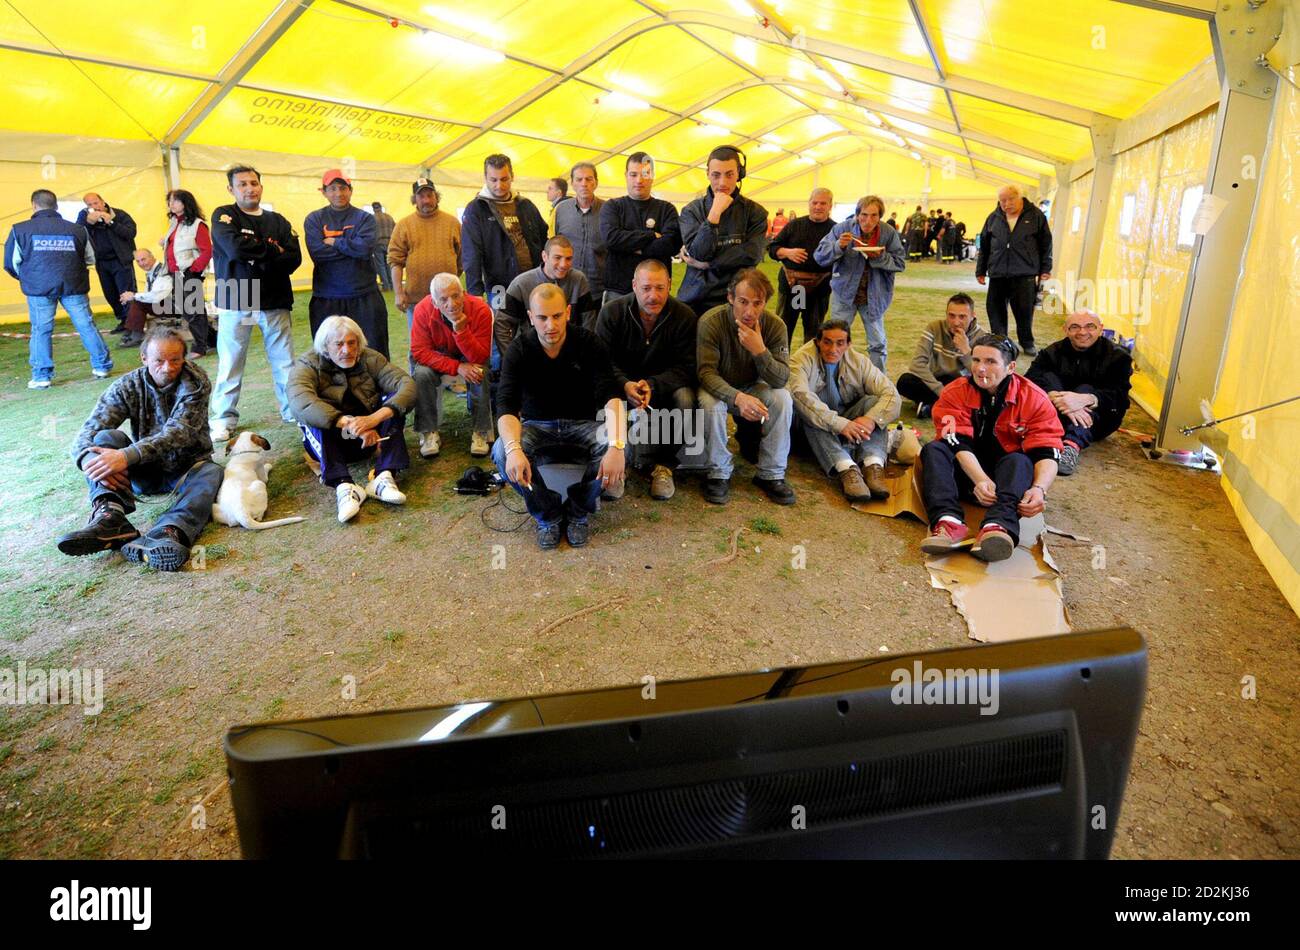 People who lost their homes in an earthquake watch Italian Serie A soccer matches on satellite television at a camp in L'Aquila April 11, 2009.  REUTERS/Daniele La Monaca     (ITALY DISASTER SPORT SOCCER) Stock Photo